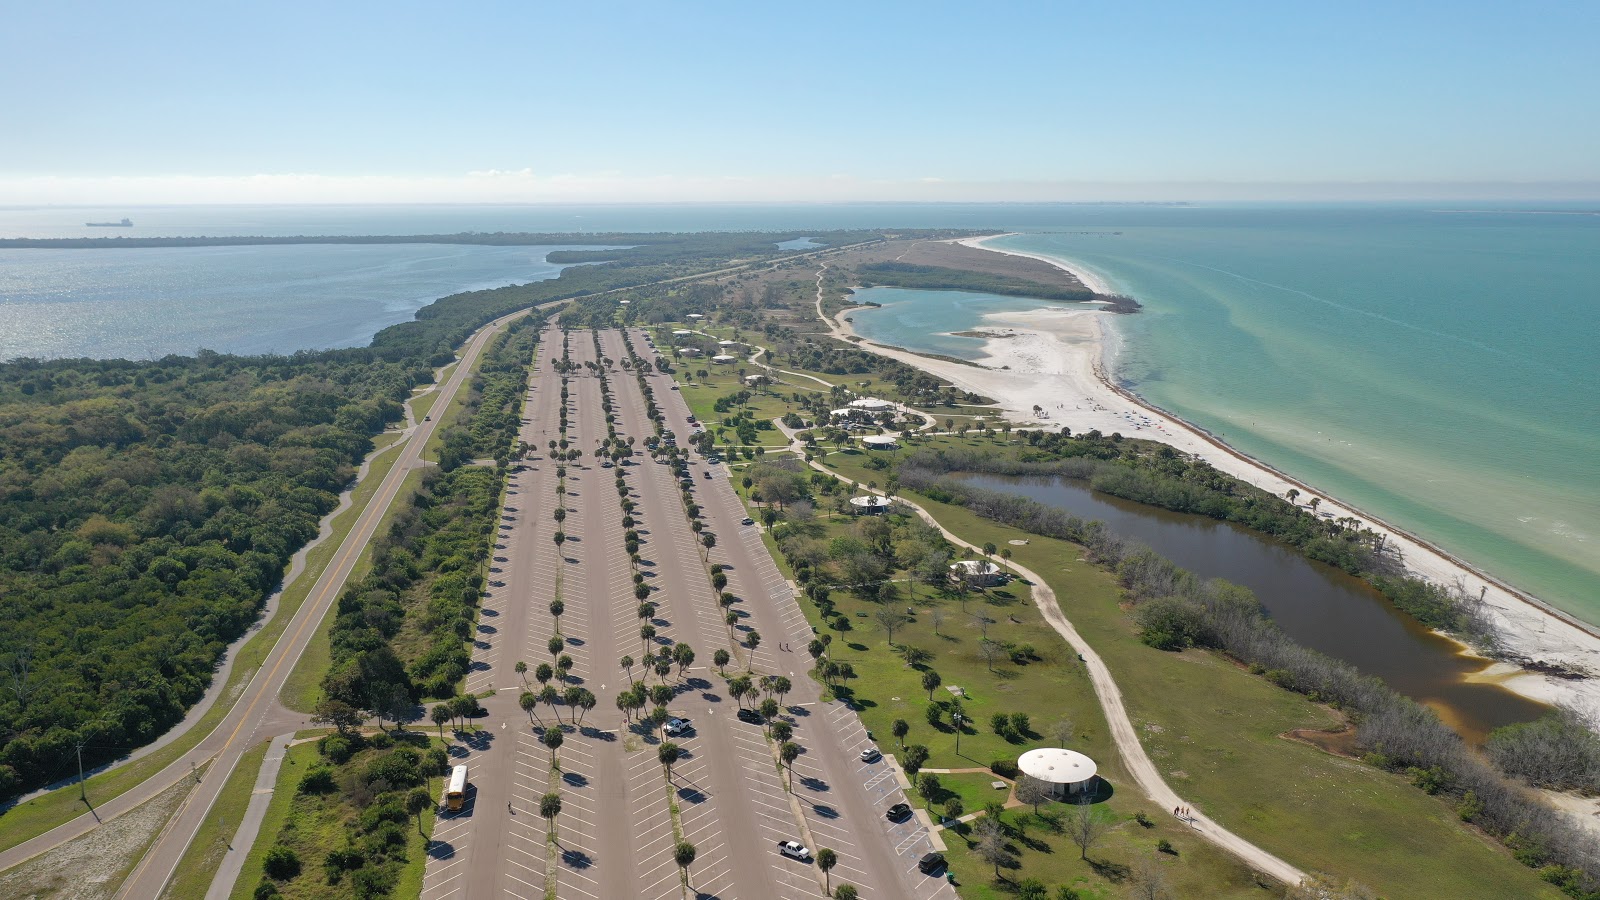 Photo of Fort desoto beach with turquoise water surface